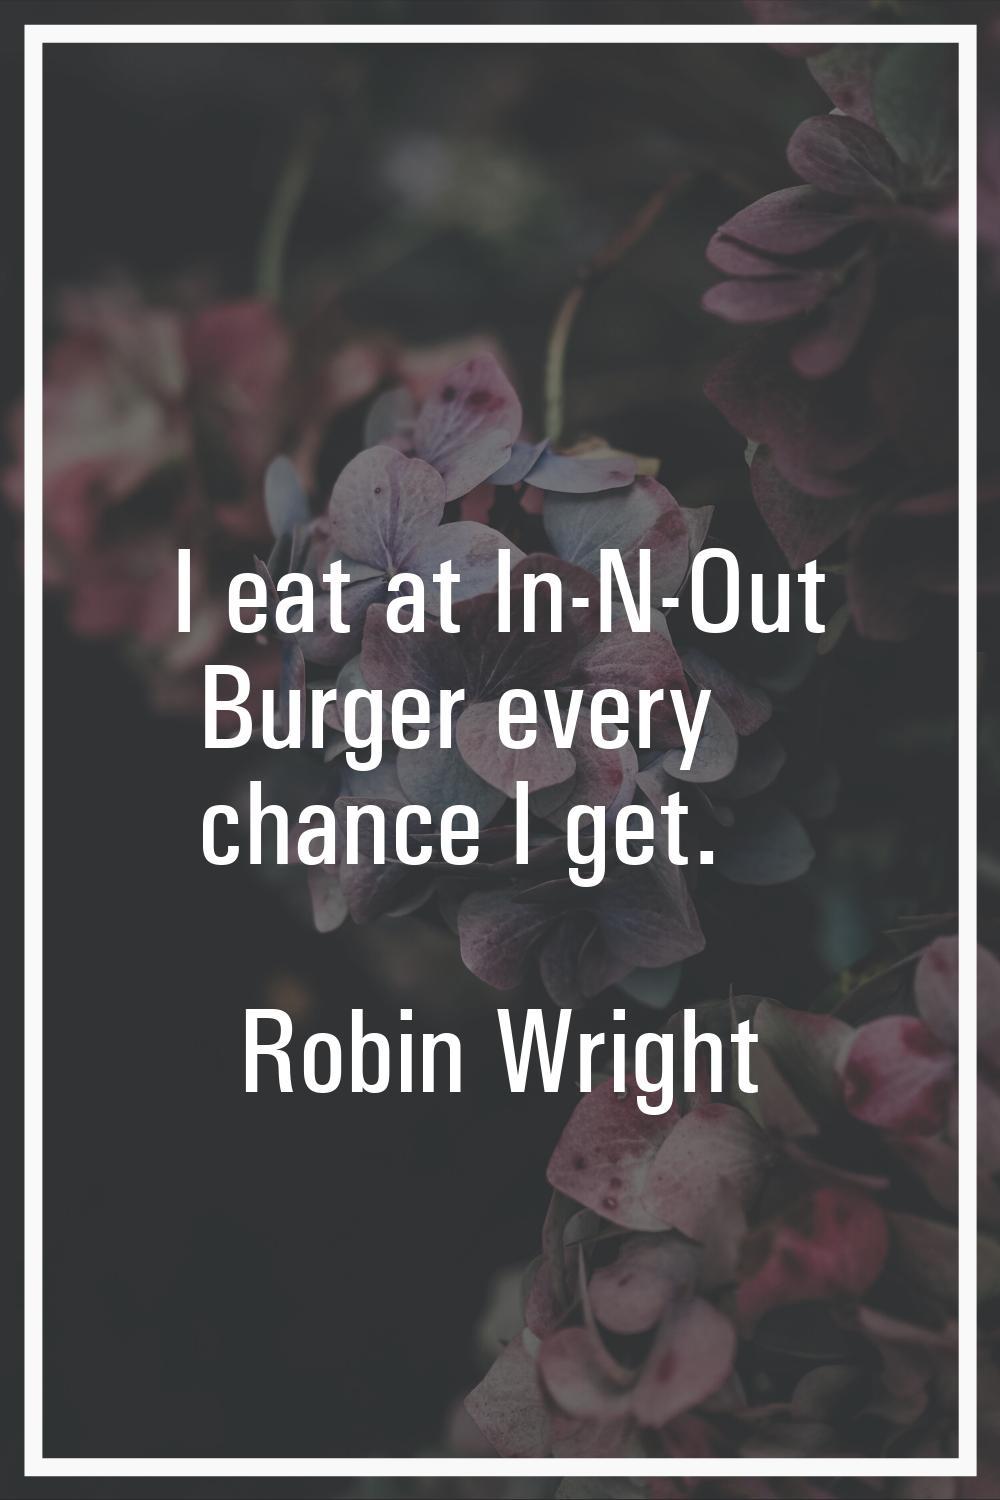 I eat at In-N-Out Burger every chance I get.